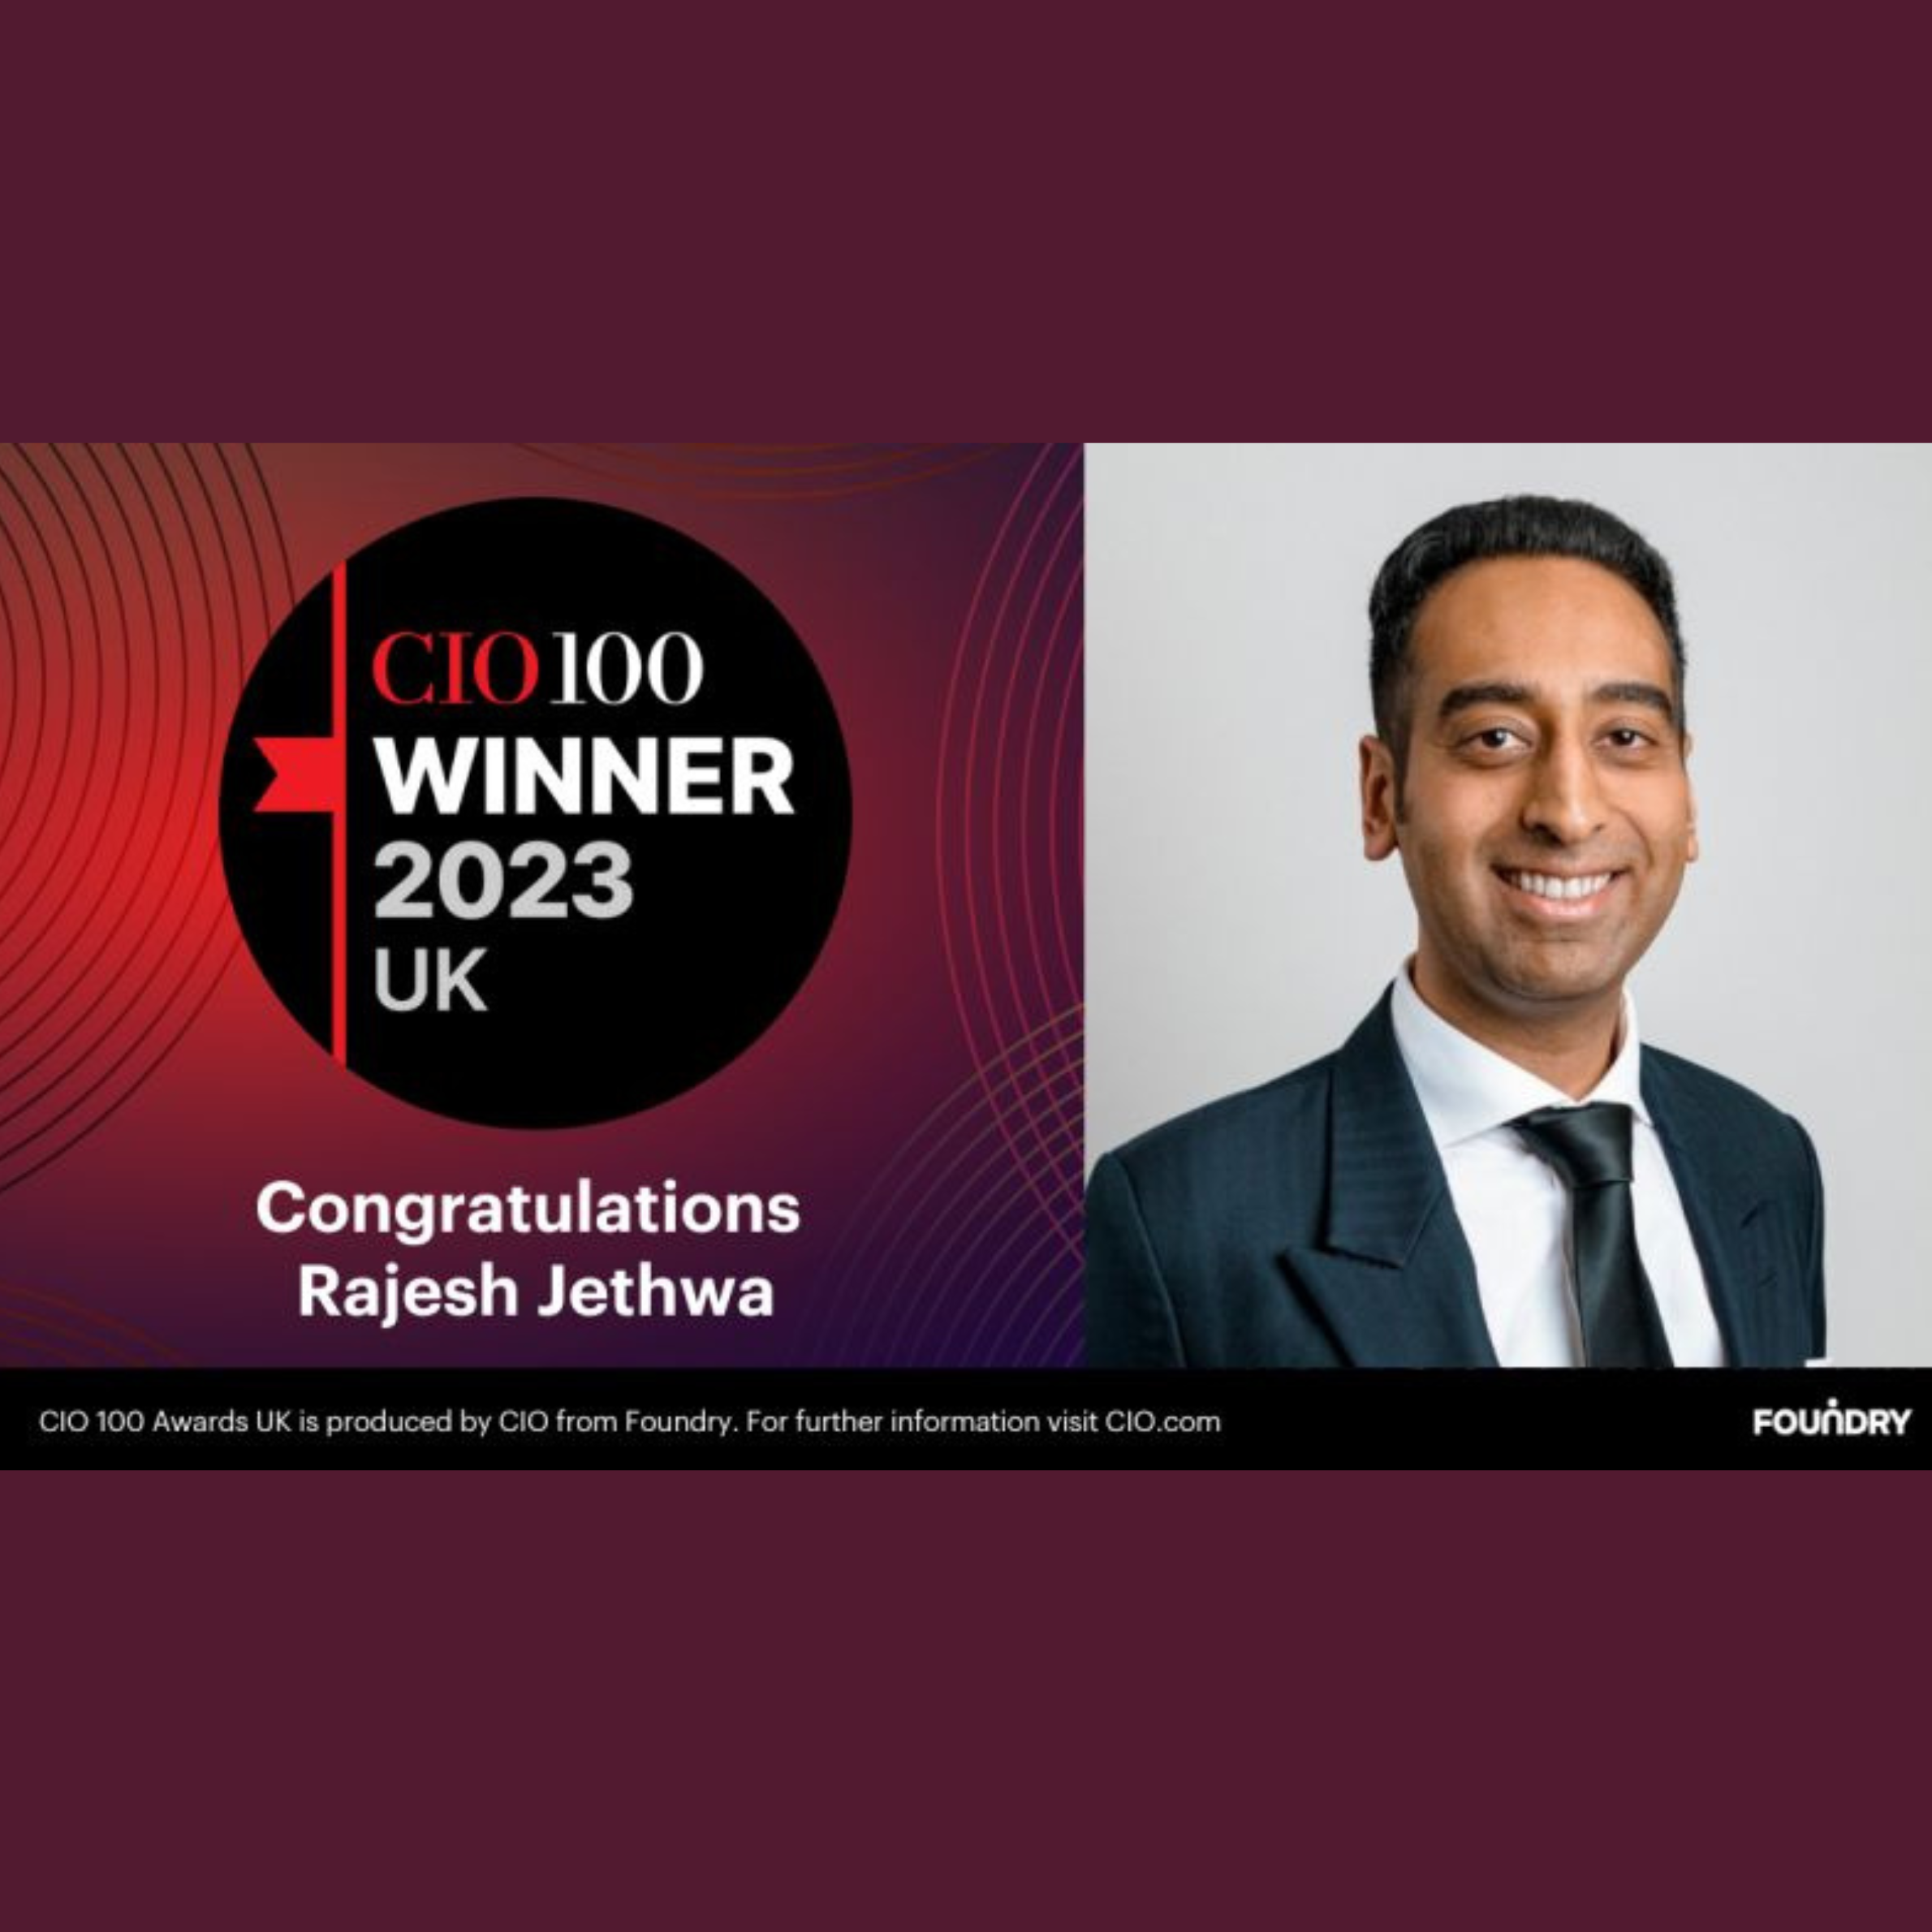 Digiterre’s Rajesh Jethwa is named in the top 30 of the 2023 CIO 100 